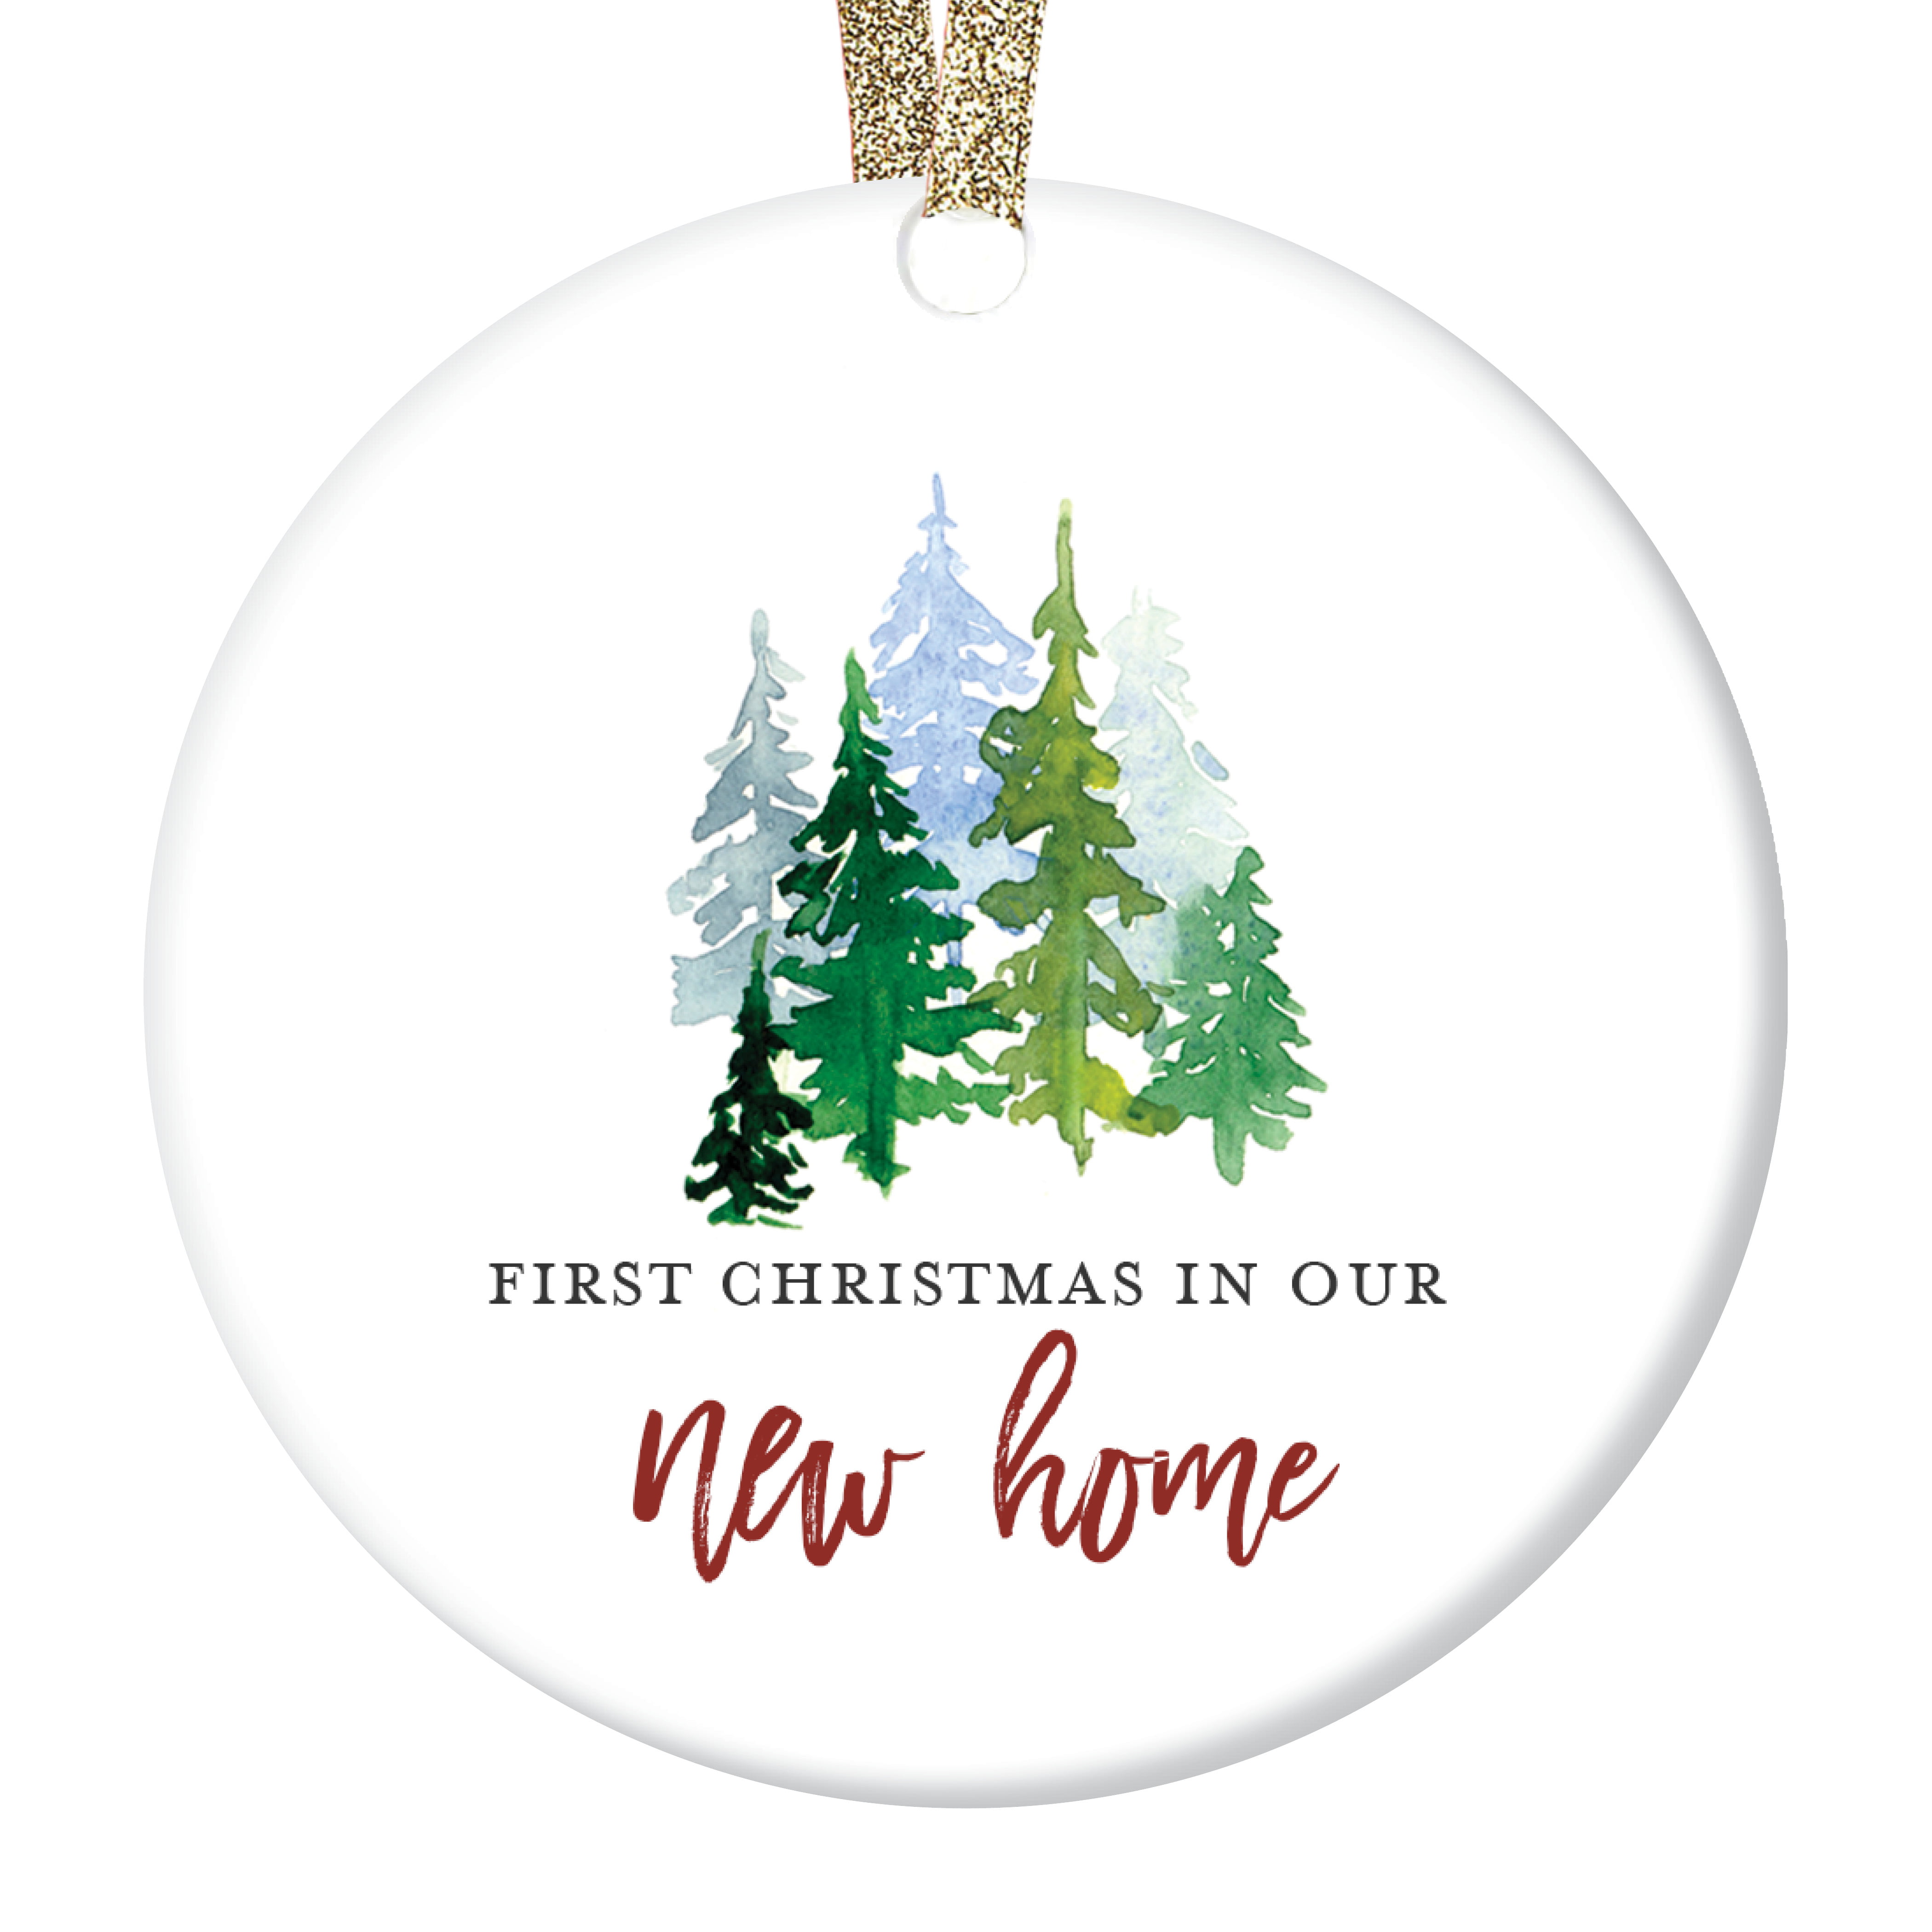 Winter Woodland Ornament Housewarming Gift Homeowner Present First Christmas in Our New Home 2019 Christmas Ornament 3 Inch Flat Ceramic Ornament with Gift Box 